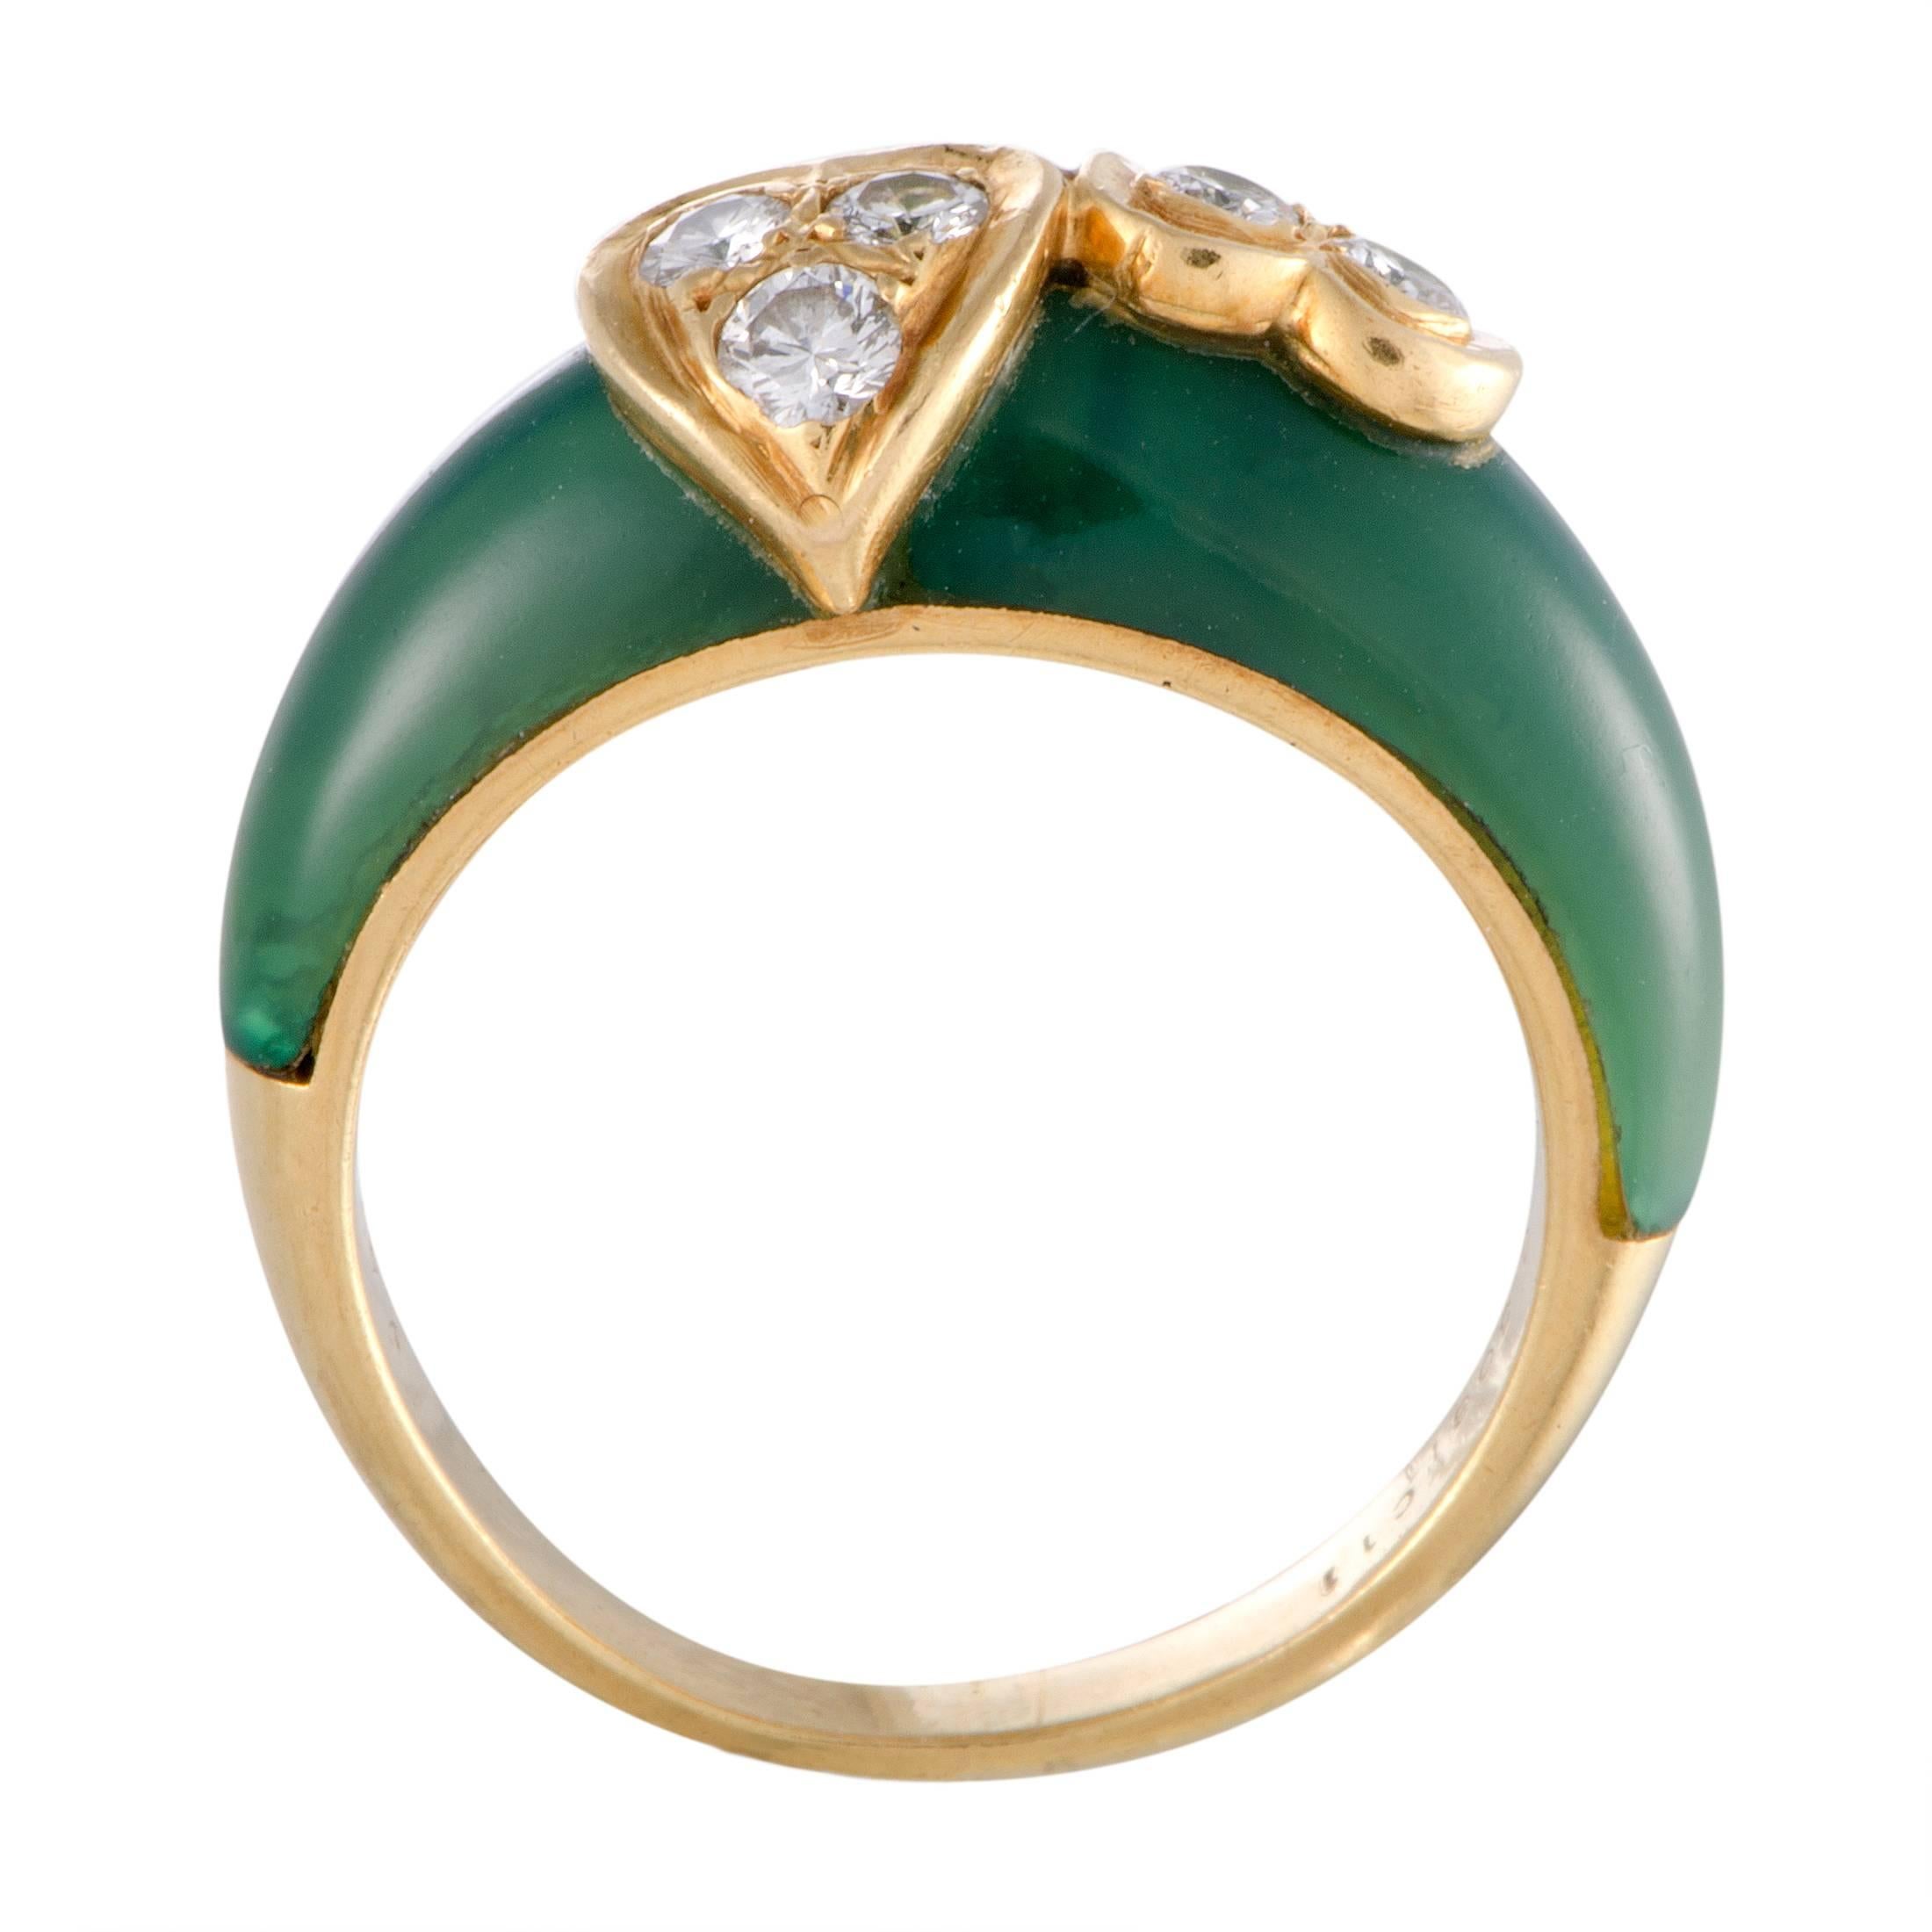 Brilliantly complementing the marvelous inherent beauty of the green jade by employing the timelessly tasteful blend of radiant 18K yellow gold and sparkling F-color diamonds of VS1 clarity weighing in total 0.30 carats, Van Cleef & Arpels produced